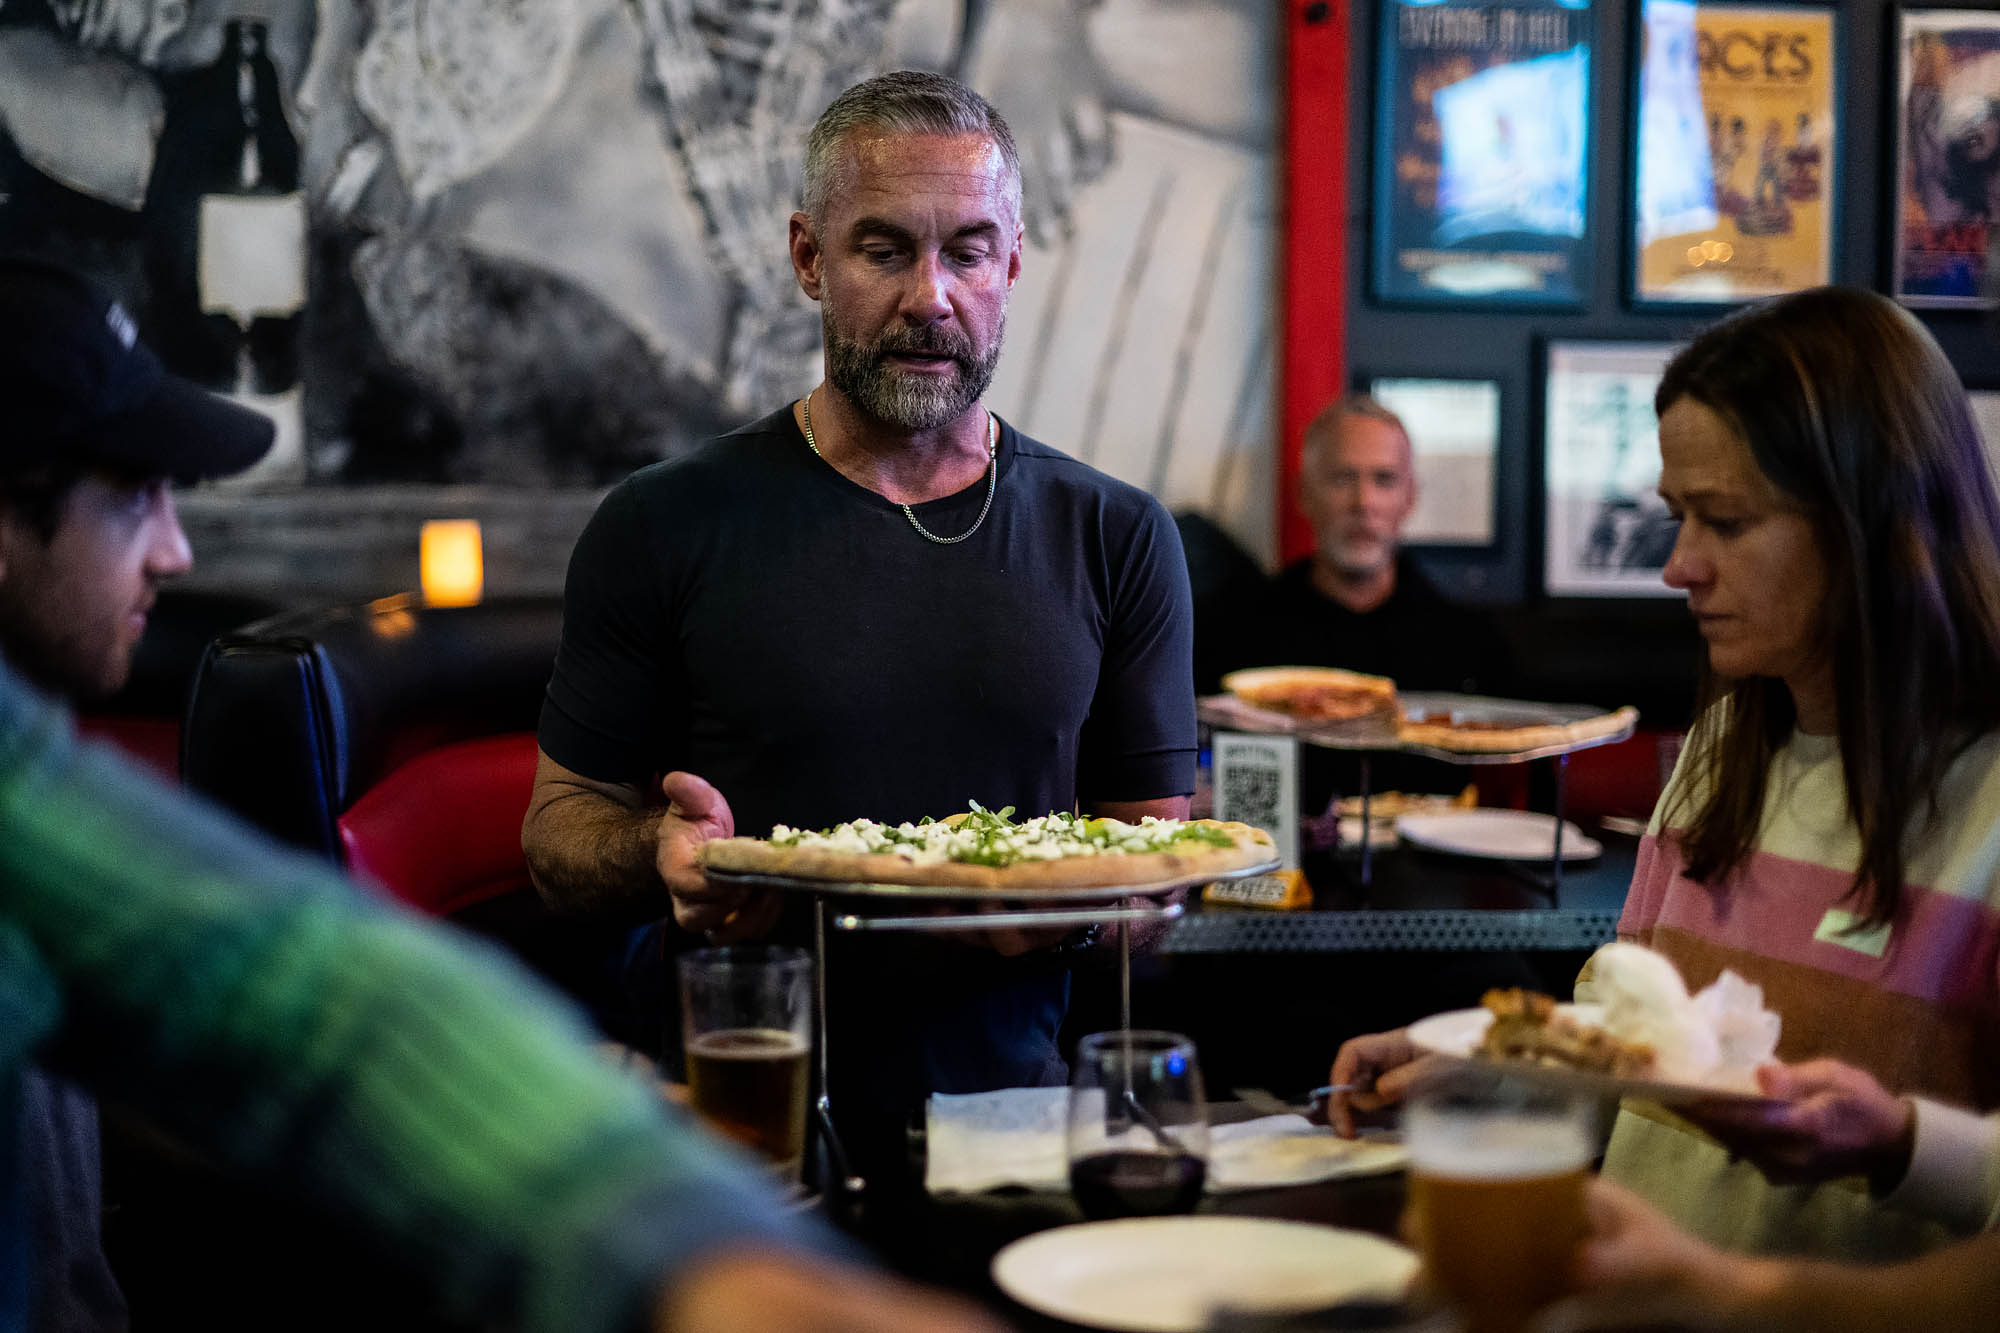 A man, Jay Harrington, delivers a pizza to a table